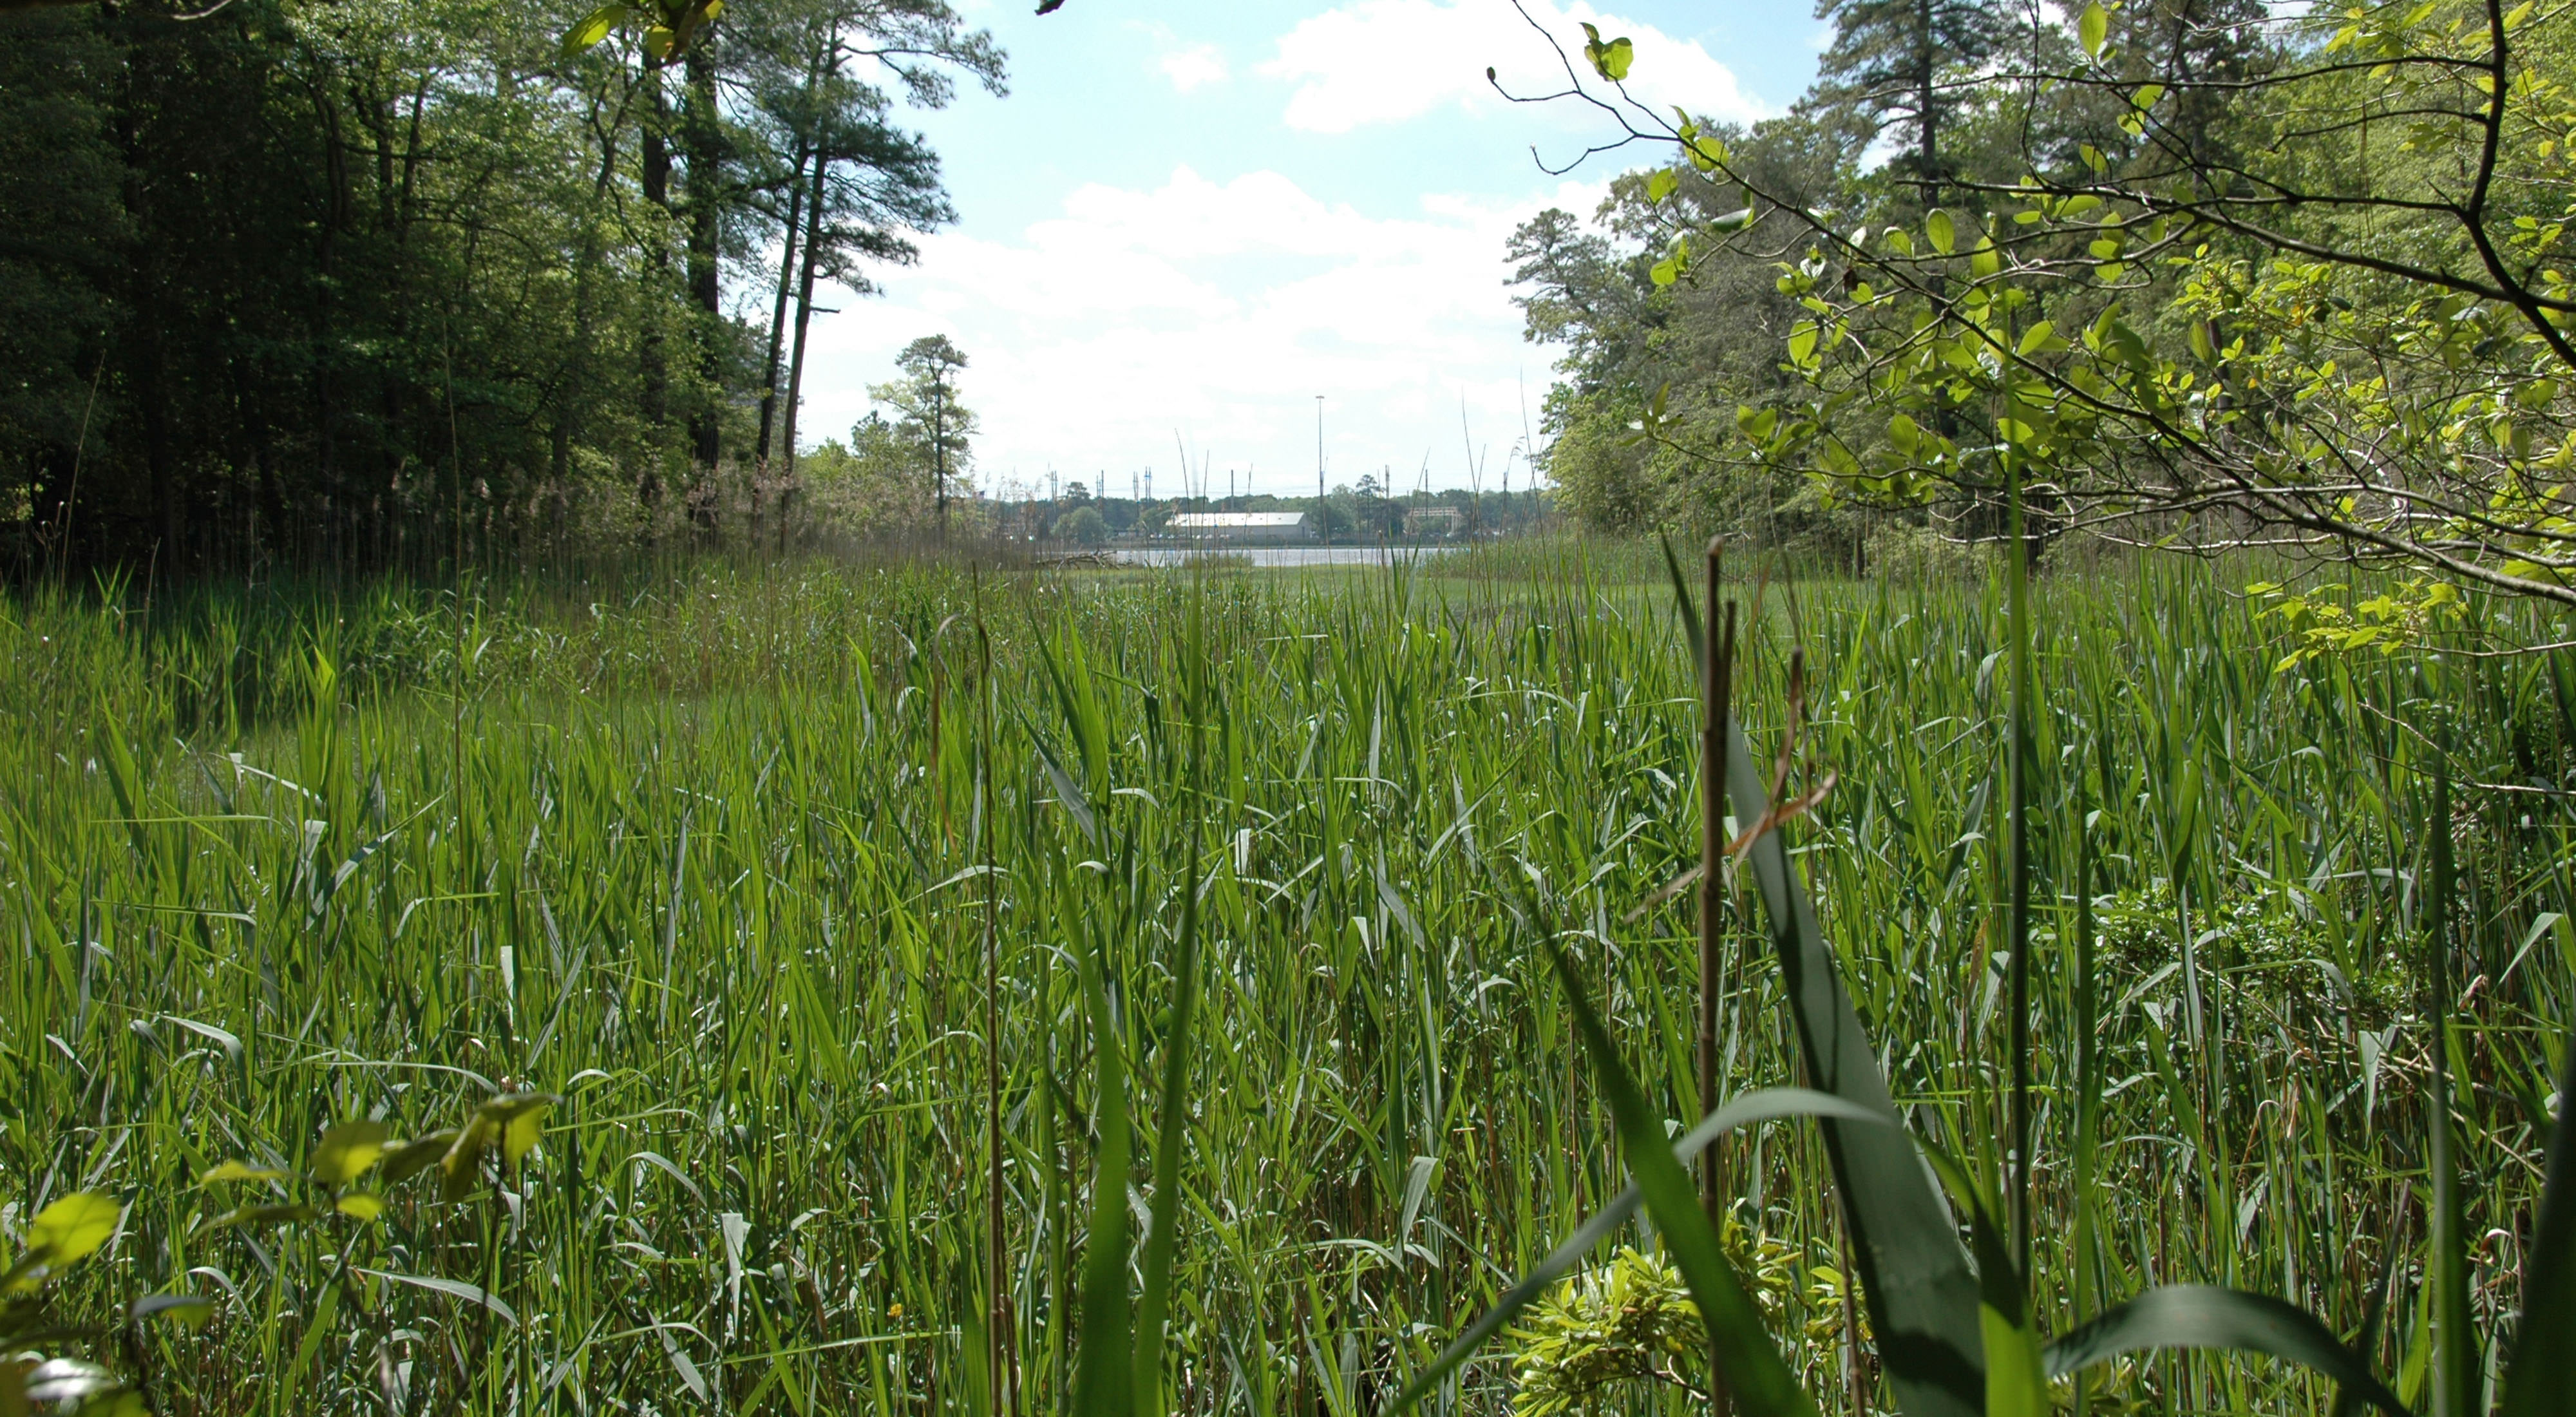 Flat, open water is visible in the distance across a wide marsh. The foreground is dominated by tall green grasses.